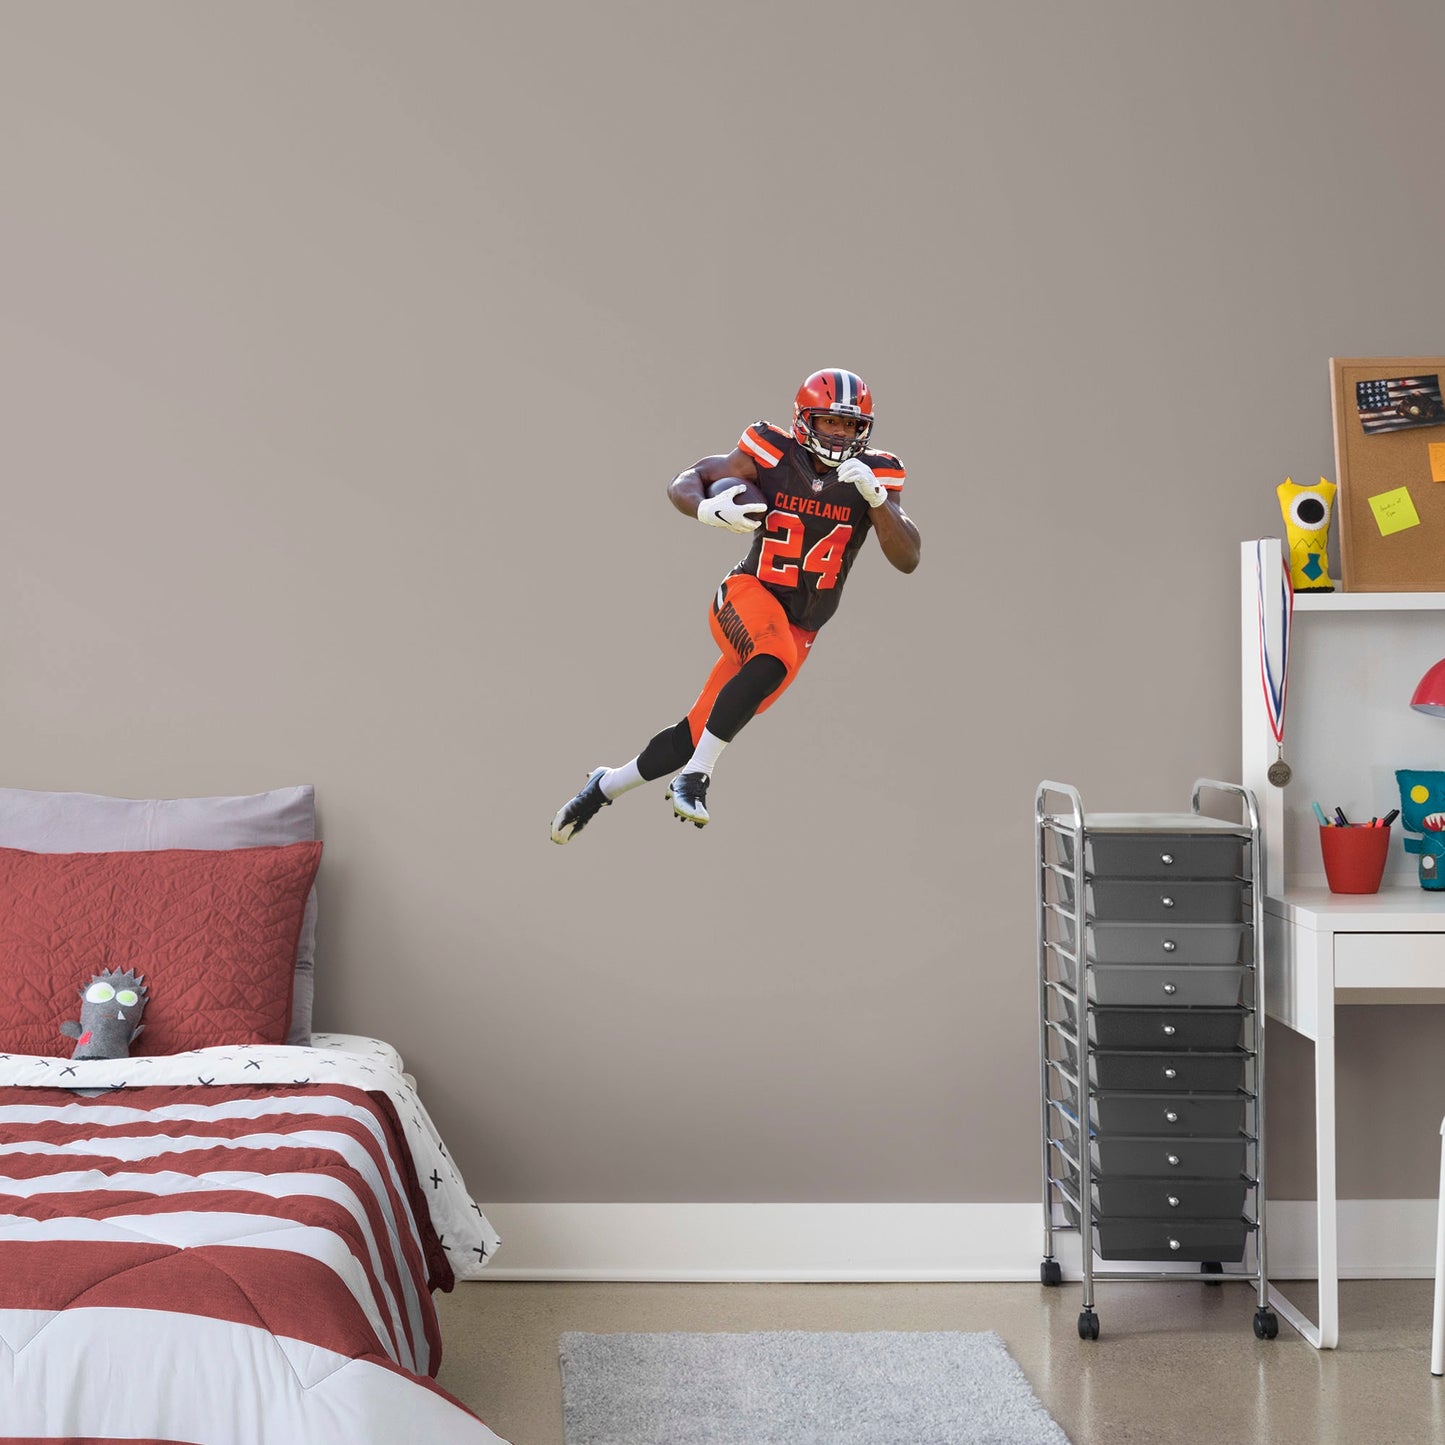 Giant Athlete + 2 Decals (37"W x 48"H) Your favorite running back has the ball and is zooming down the field in this dynamic, photo-real wall decal. Celebrate Nick Chubb's brilliant career, from winning SEC Freshman of the Year back at Georgia to his 2019 Pro Bowl appearance with the Browns. This is a high-quality gift for any fan who can't wait to see No. 24 dance through the defenders in his next game.